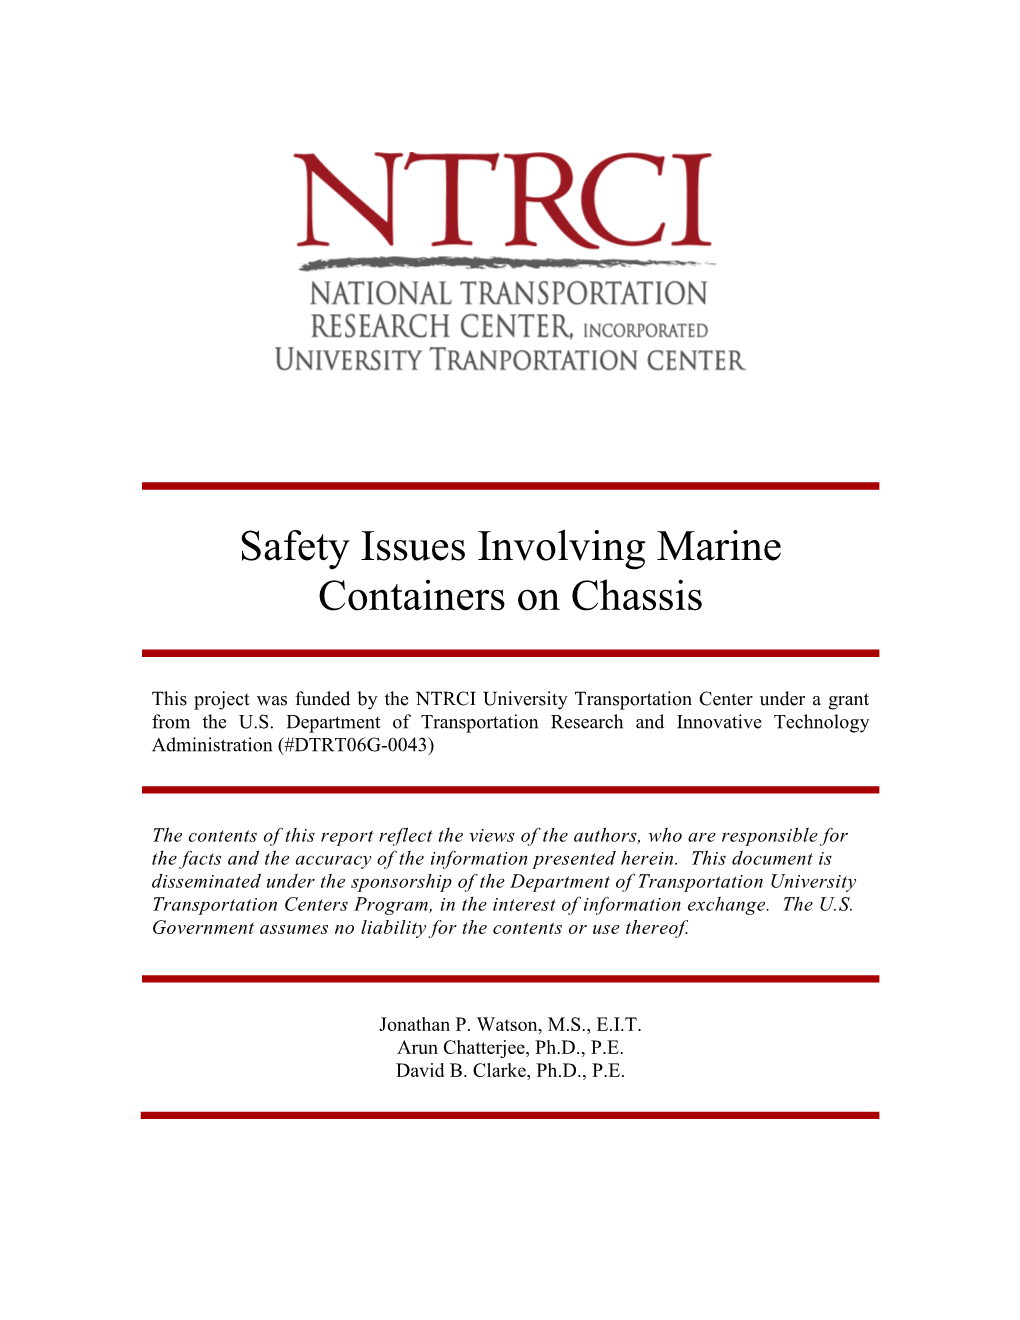 Safety Issues Involving Marine Containers on Chassis